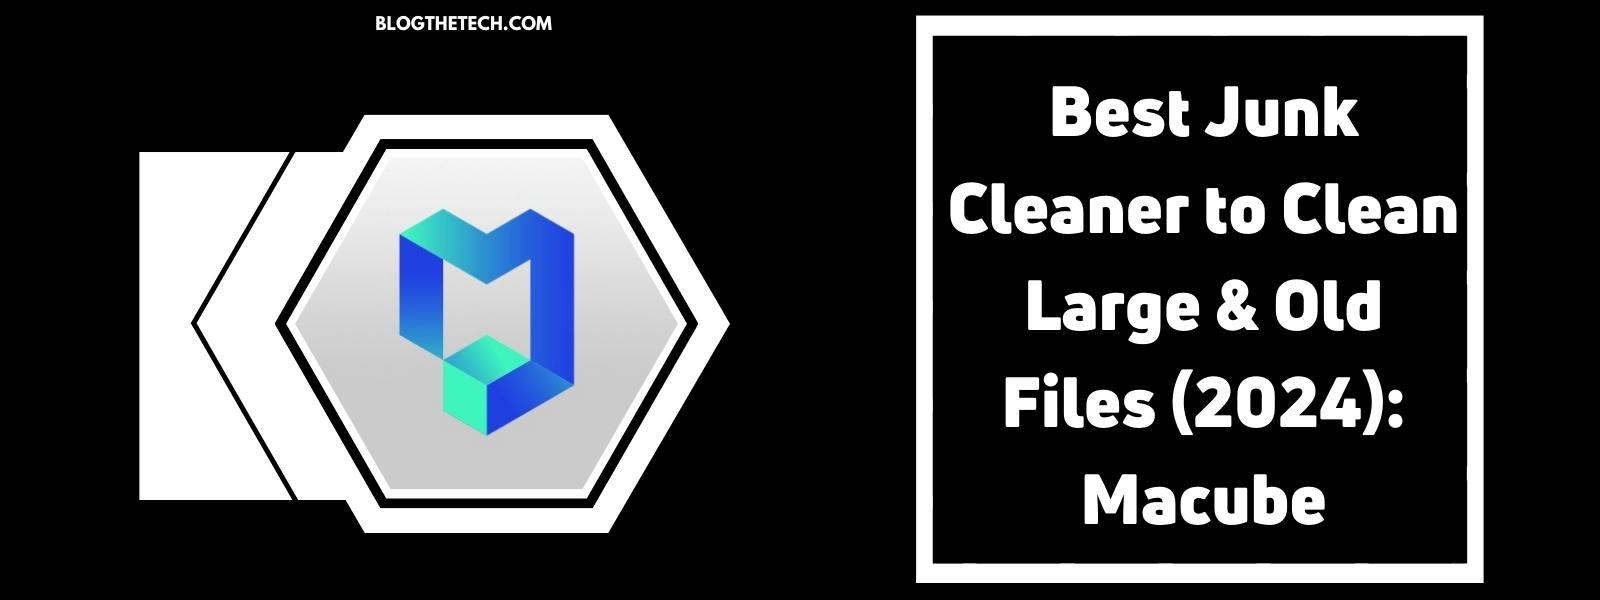 Best-Junk-Cleaner-to-Clean-Large-Old-Files-Macube-Featured